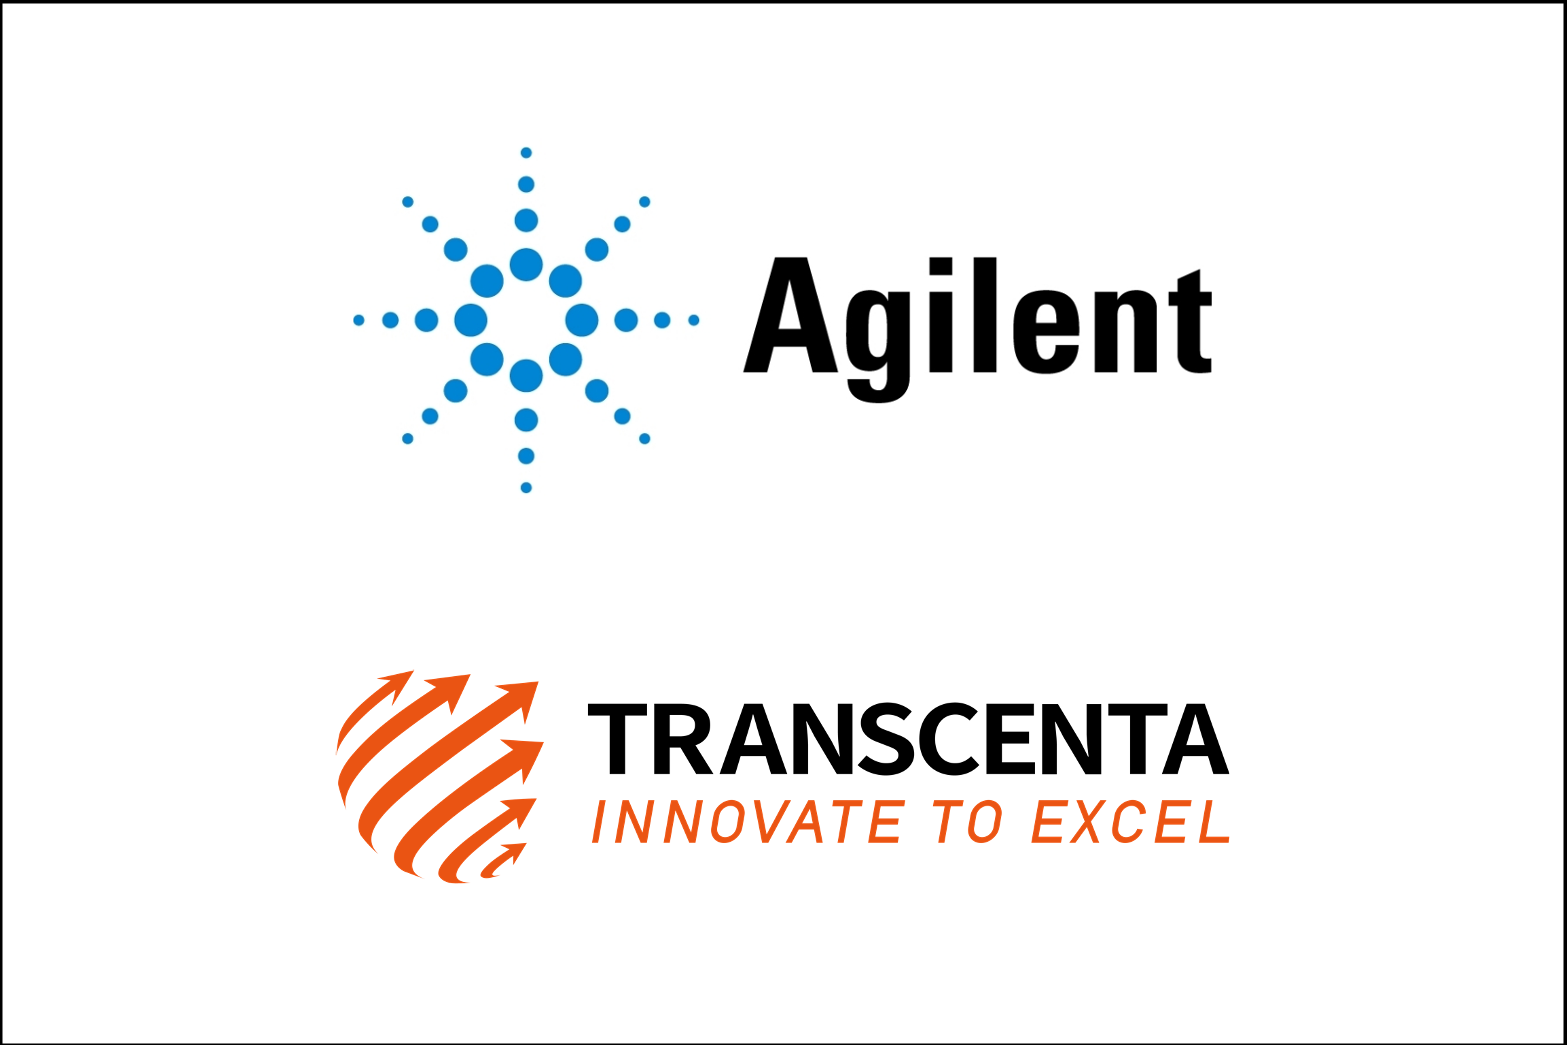 Transcenta Announces Collaboration with Agilent to Develop a Claudin18.2 Companion Diagnostic to Support Osemitamab (TST001) Global Phase III Trial